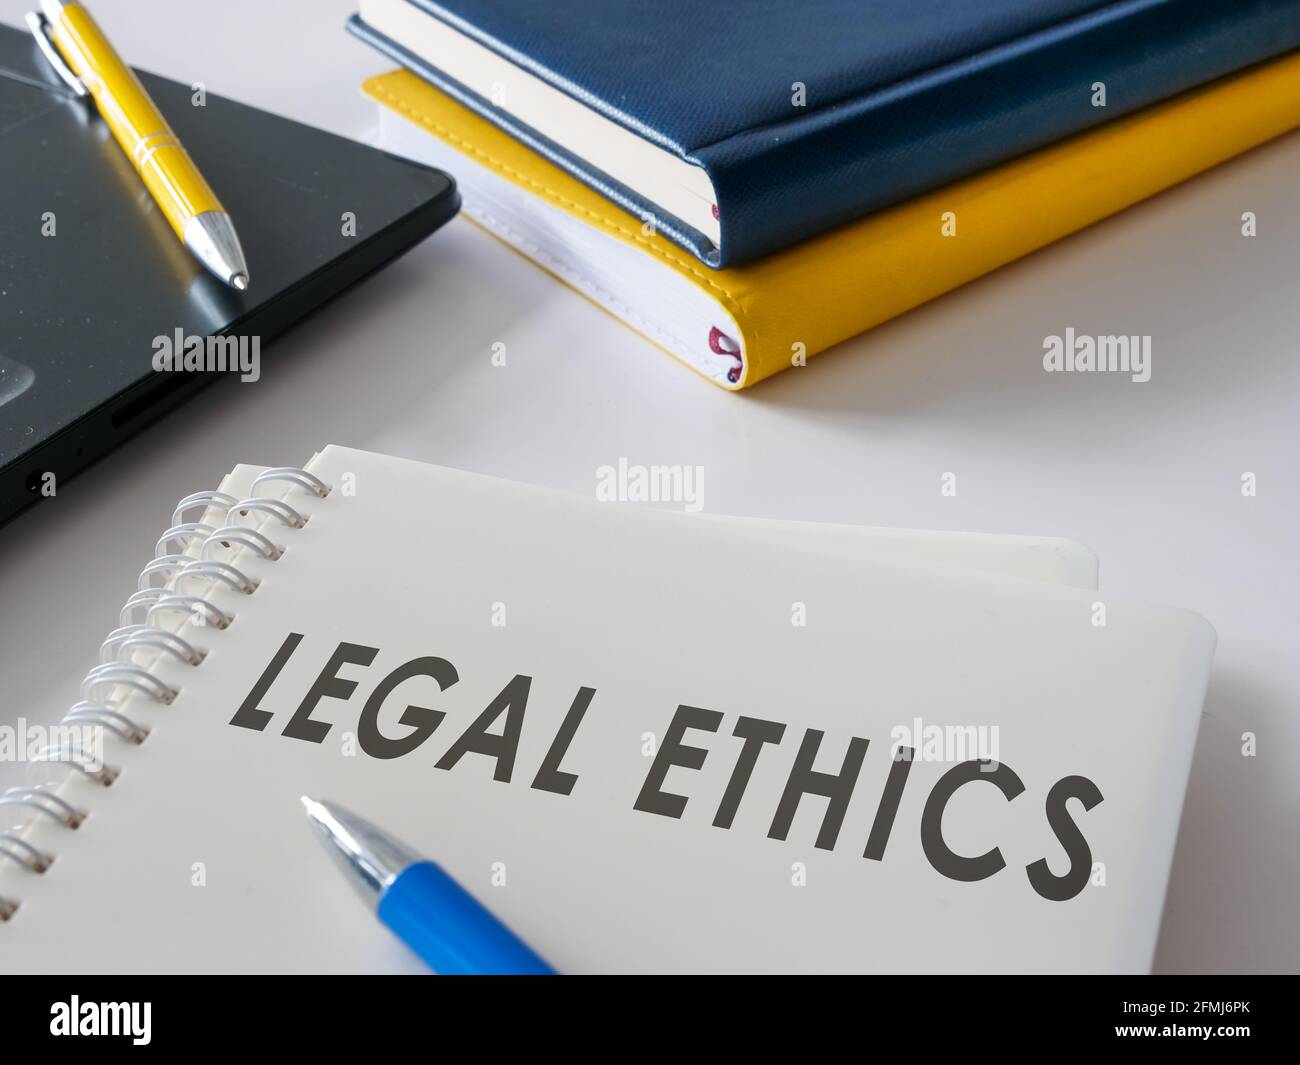 Documents about legal ethics and laws on the desk. Stock Photo